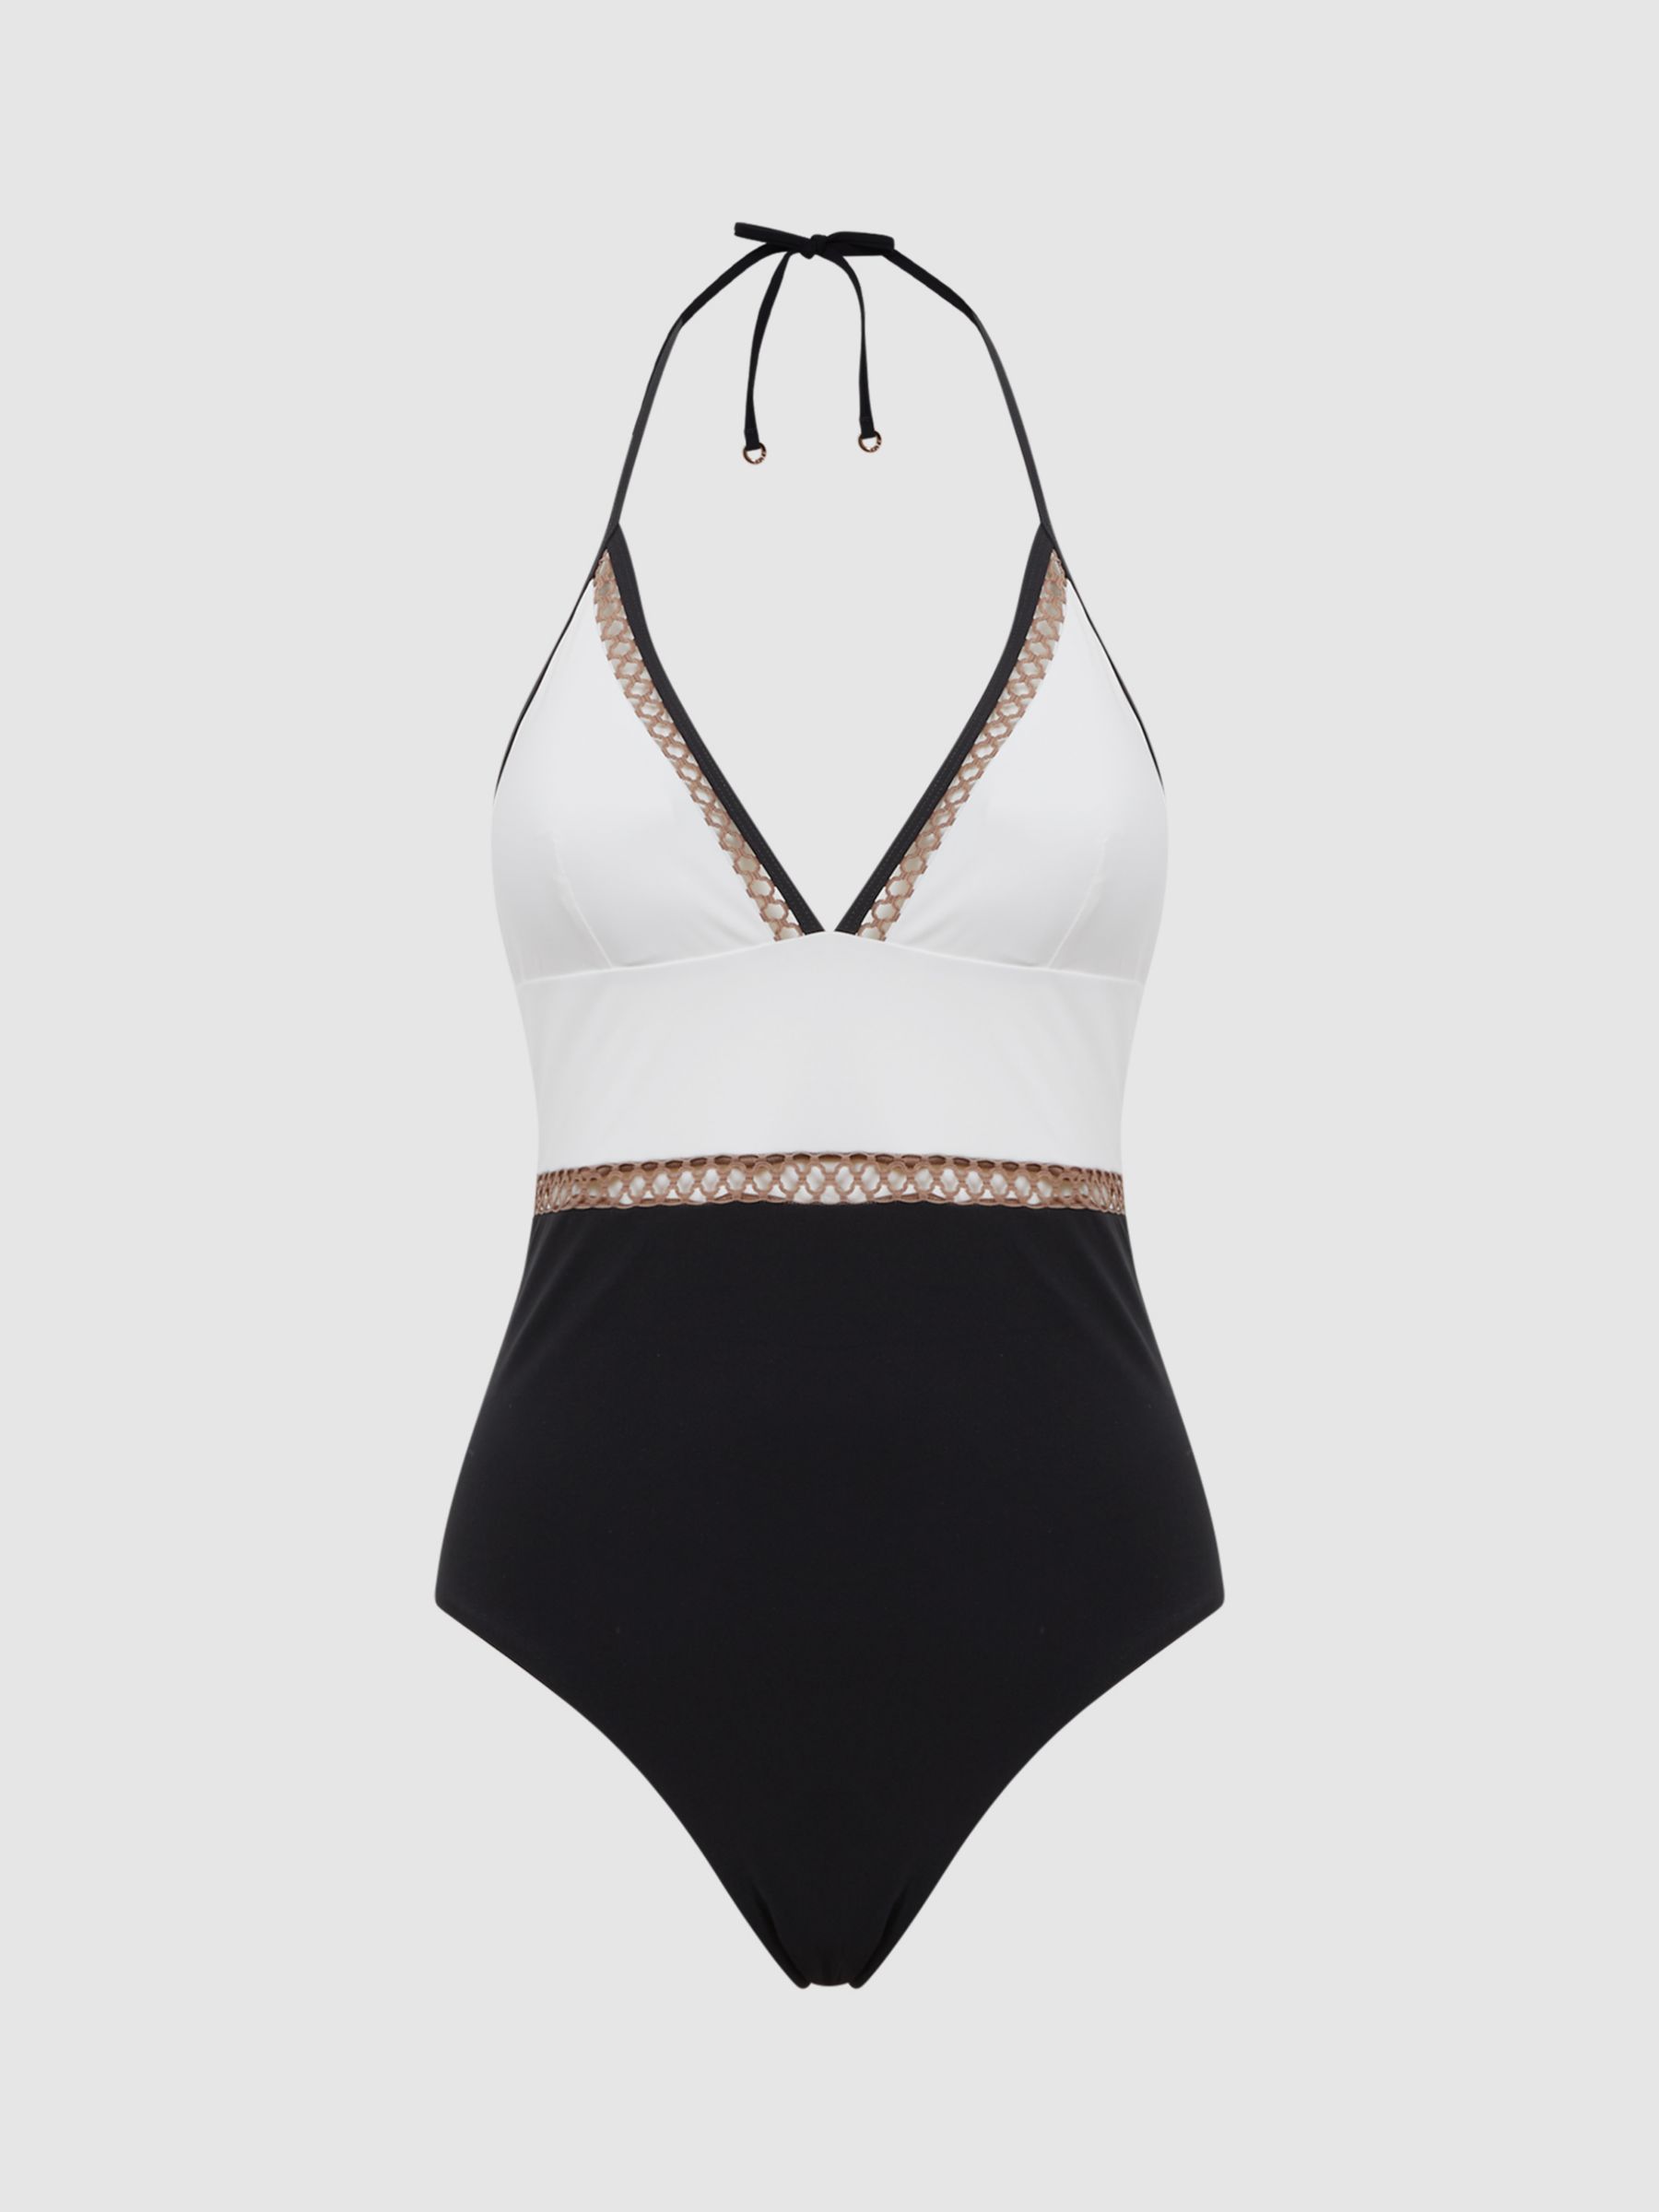 Reiss Ray Embroidered Colour Block Swimsuit, White/Tan, 14